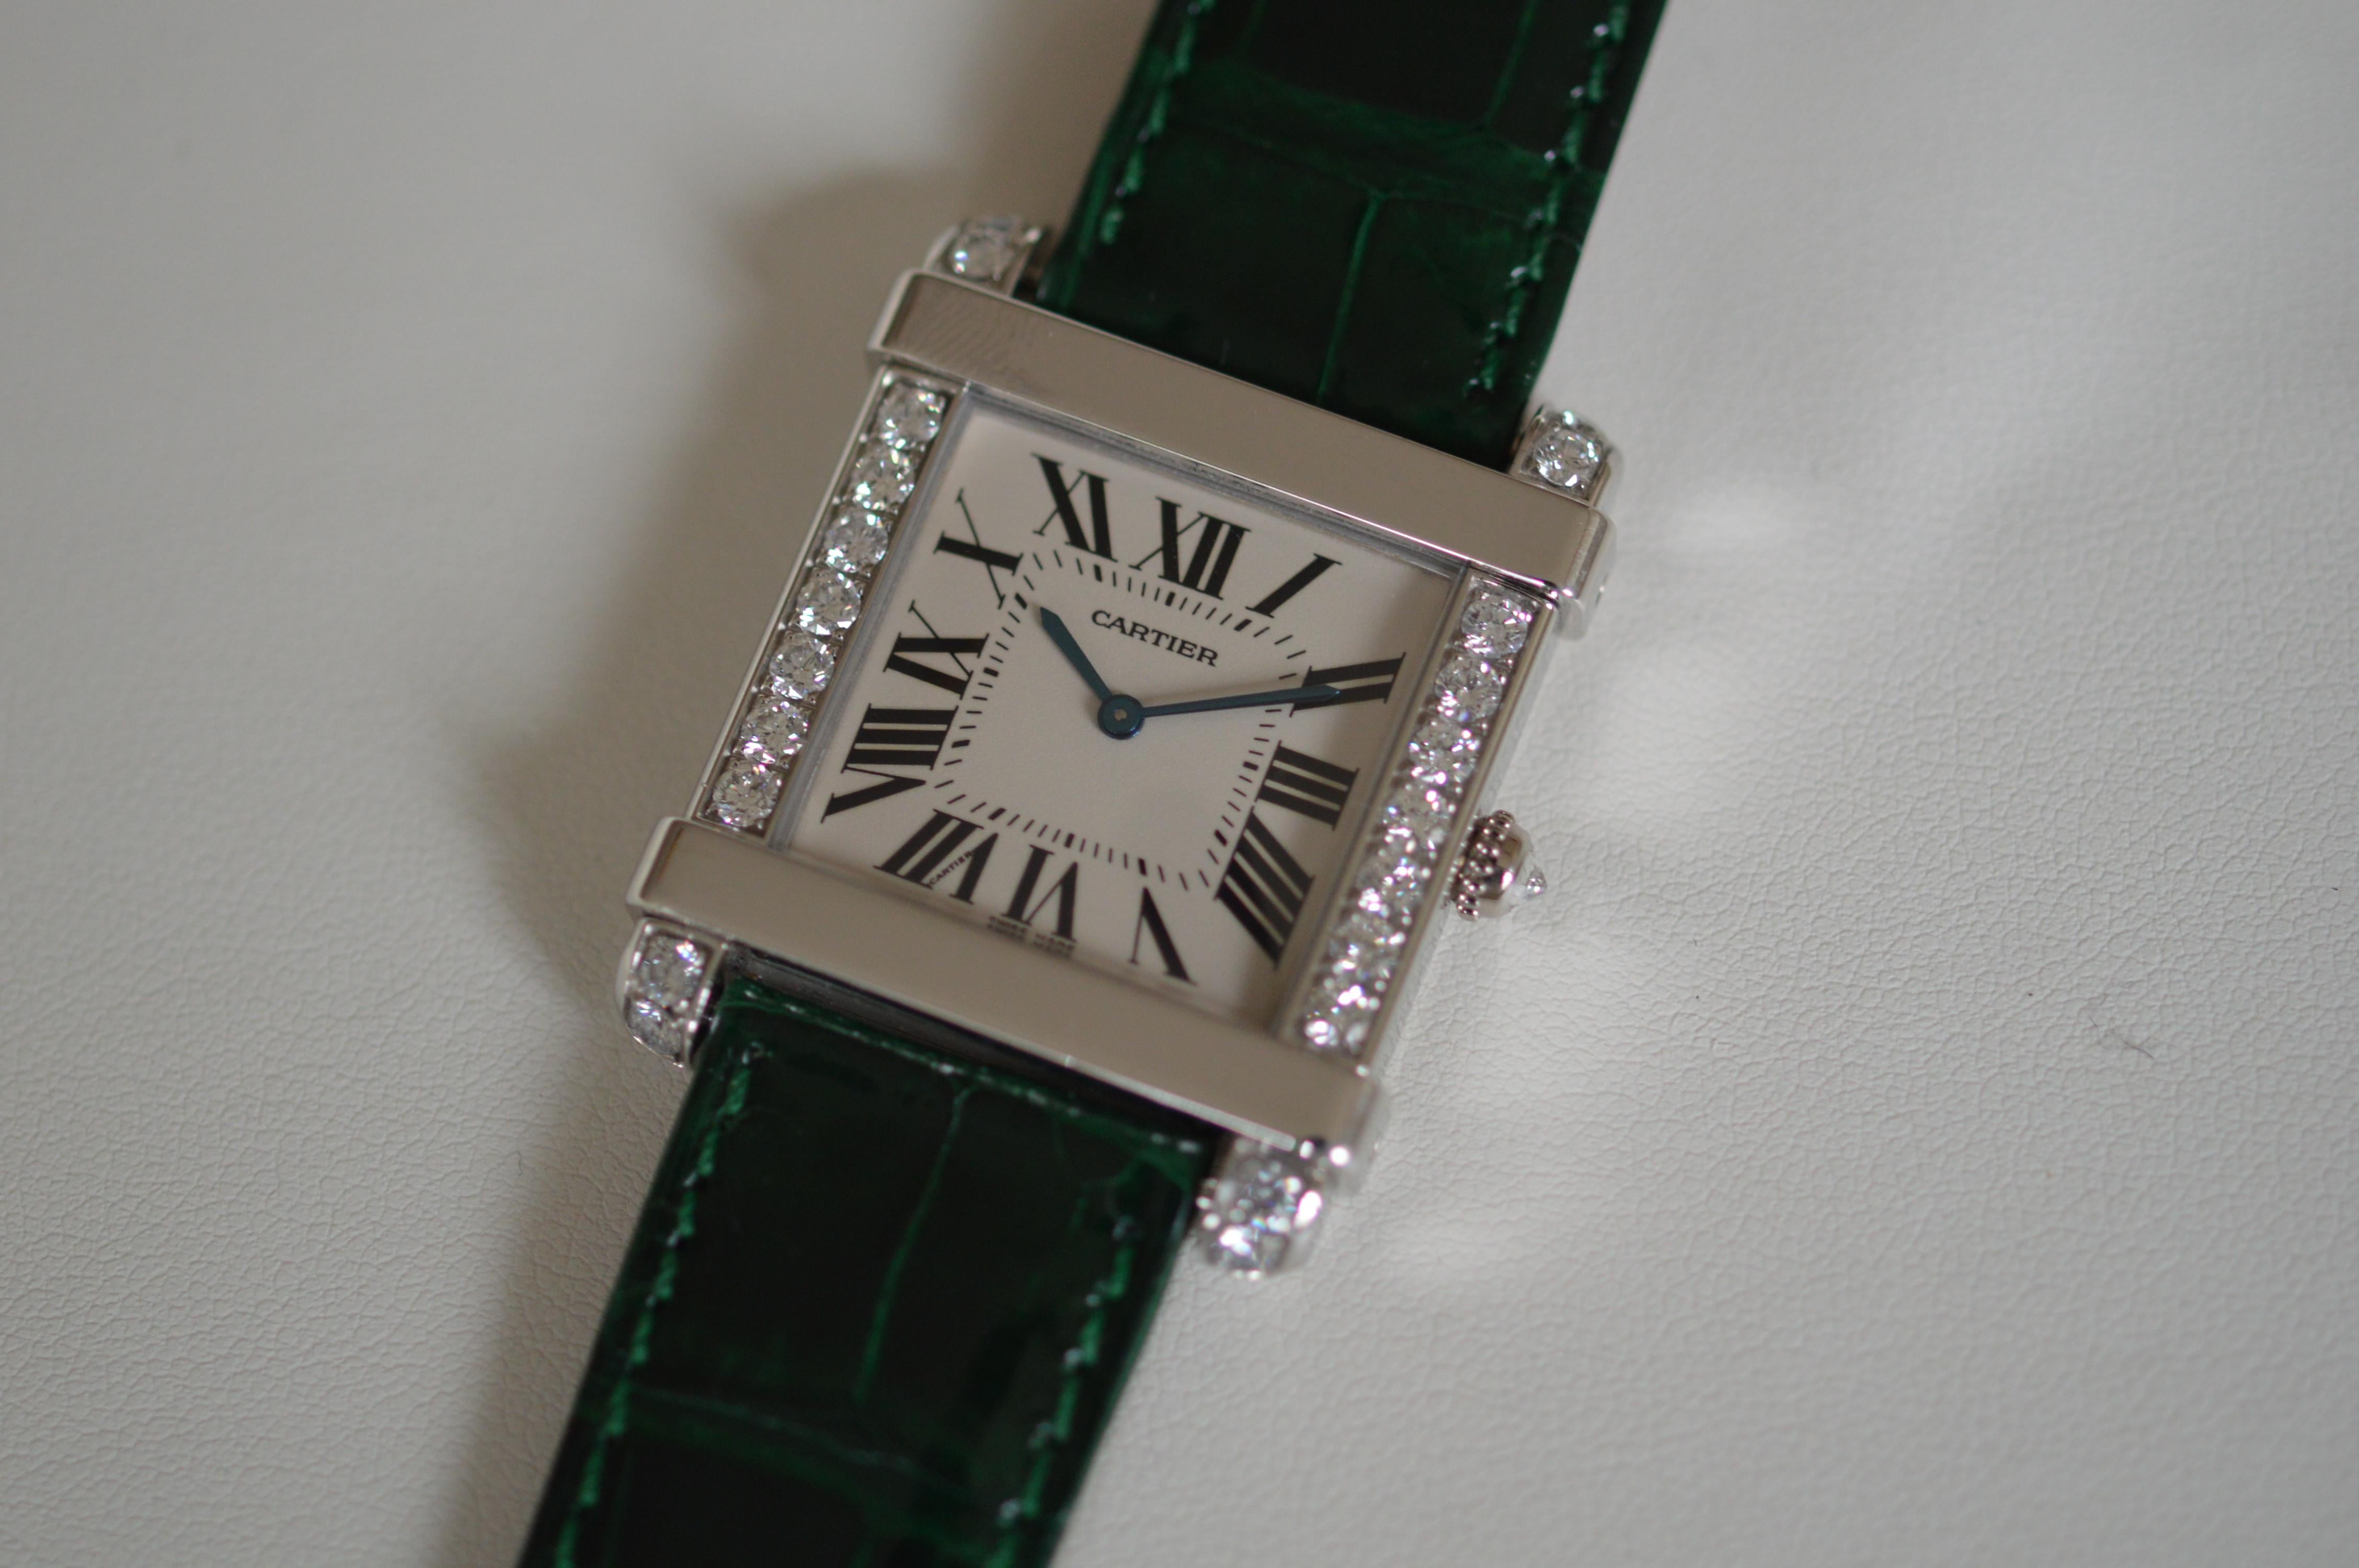 Cartier Tank Chinoise LM Boutique Only item
Very rare item in this condition
Large size
37mm X 30mm
In Platinum case
Green Cartier strap
Reference n° WE300251
Original Cartier Diamond setting
Vertical sides set with 23 Round Diamonds
For a total of